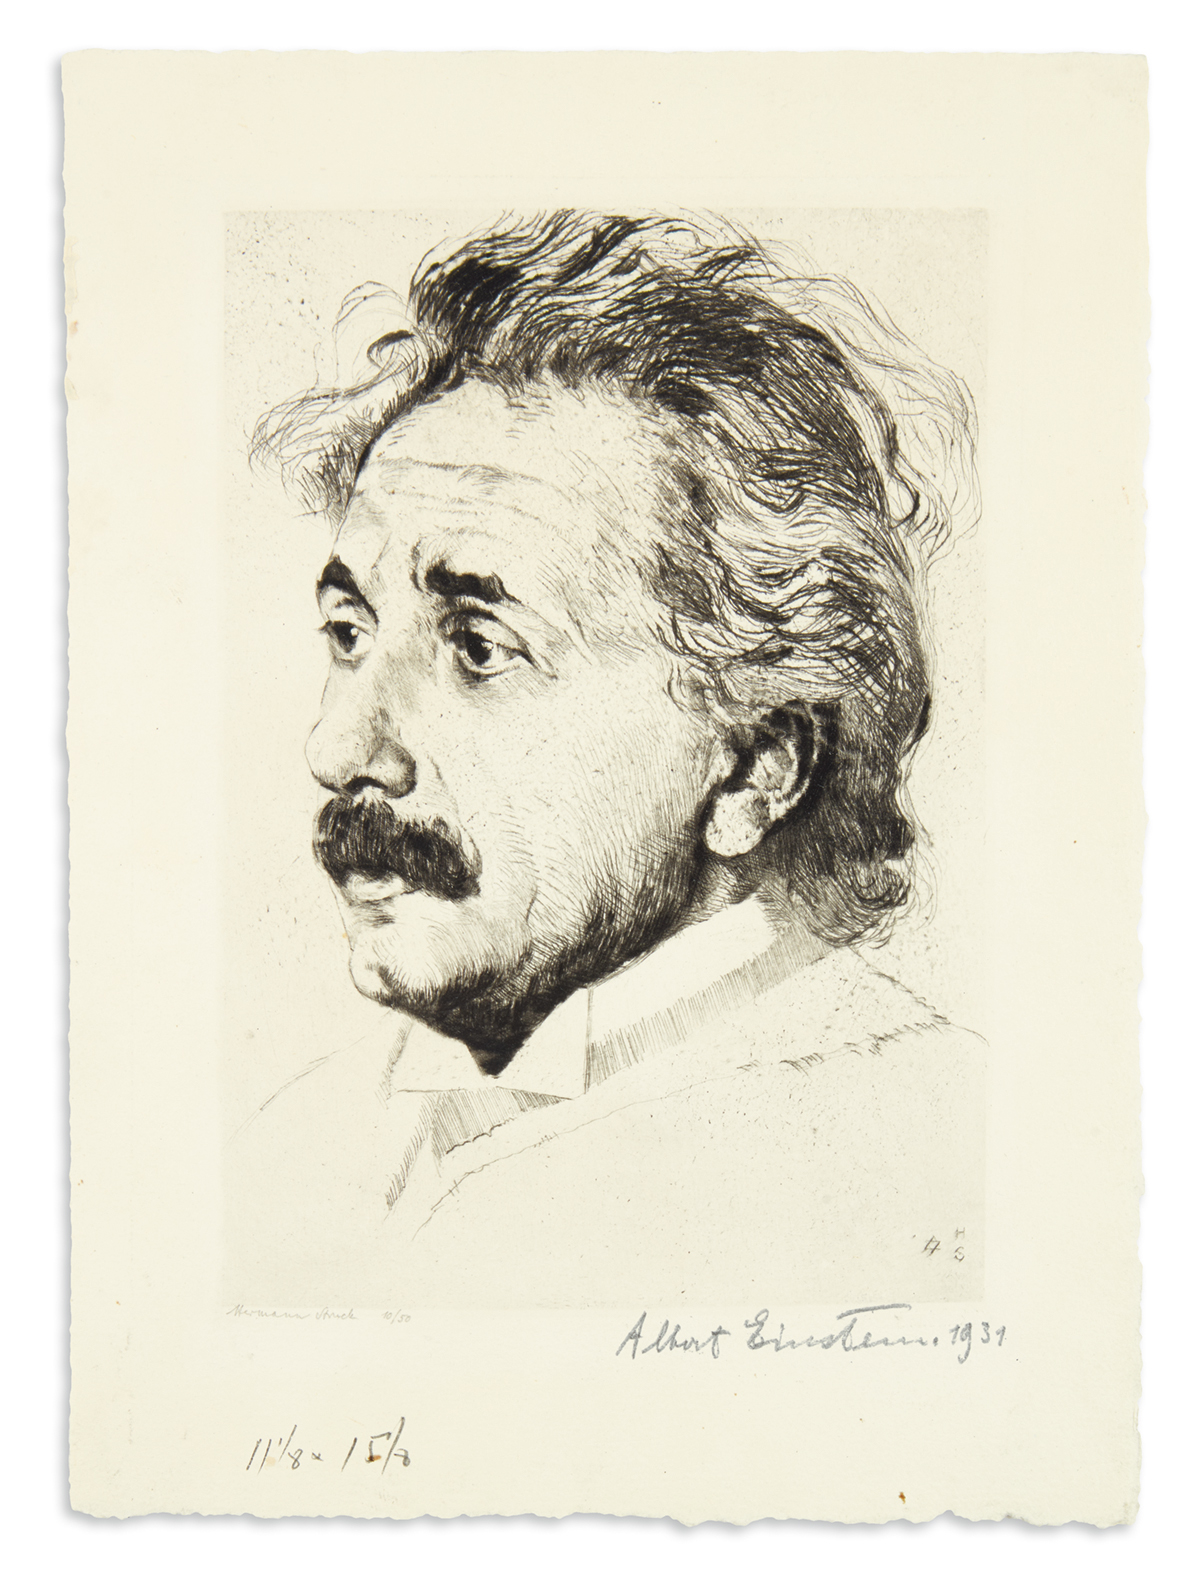 (SCIENTISTS.) EINSTEIN, ALBERT. Etched bust portrait of him by Hermann Struck, Signed at lower right, in pencil, showing him in ¾ view.